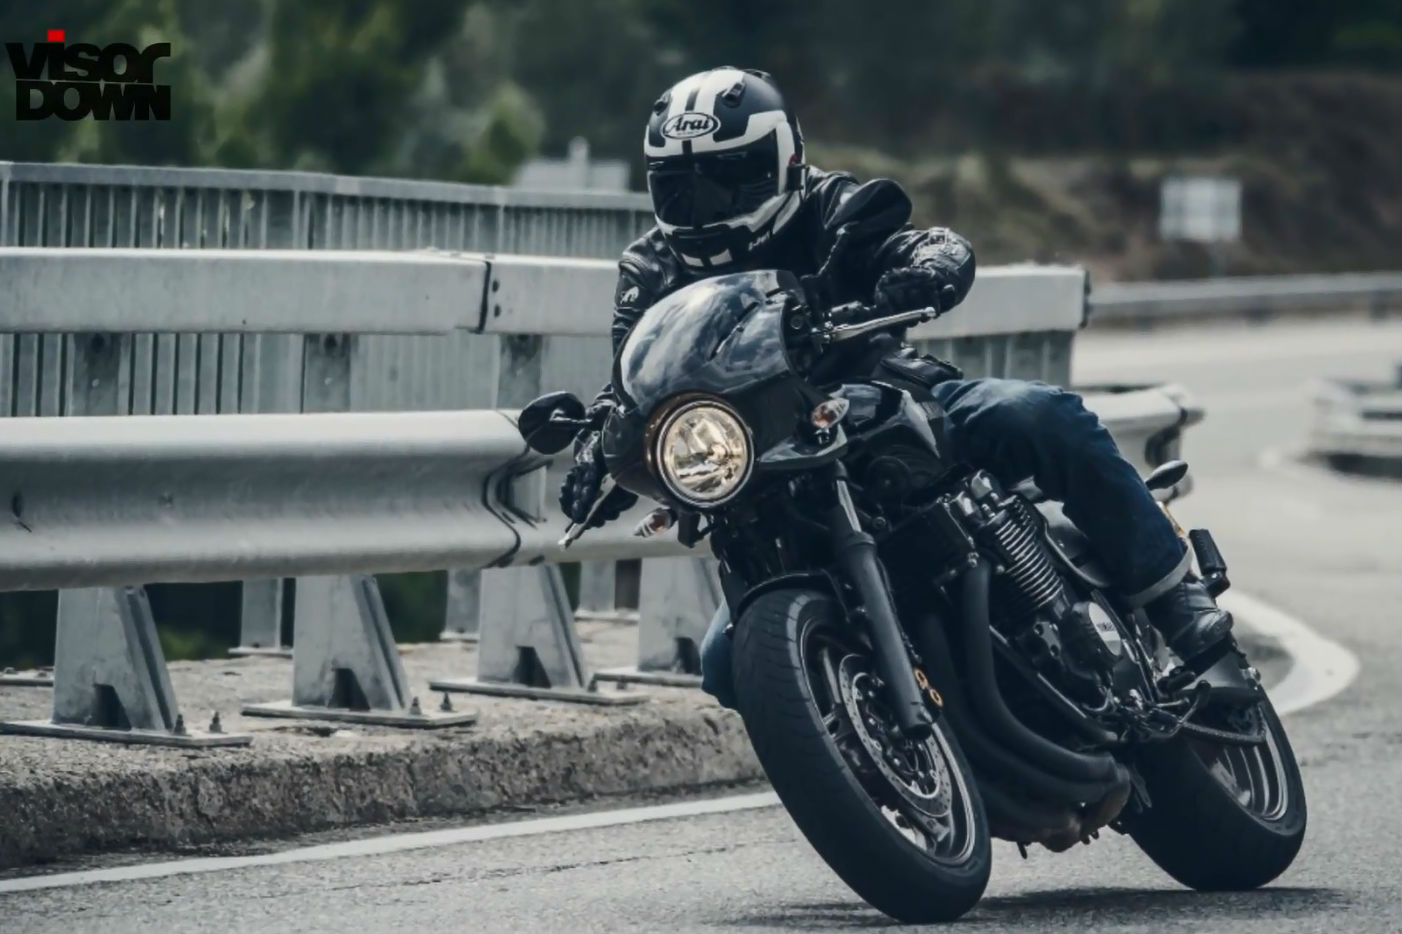 Video review: Yamaha XJR1300 Racer road test